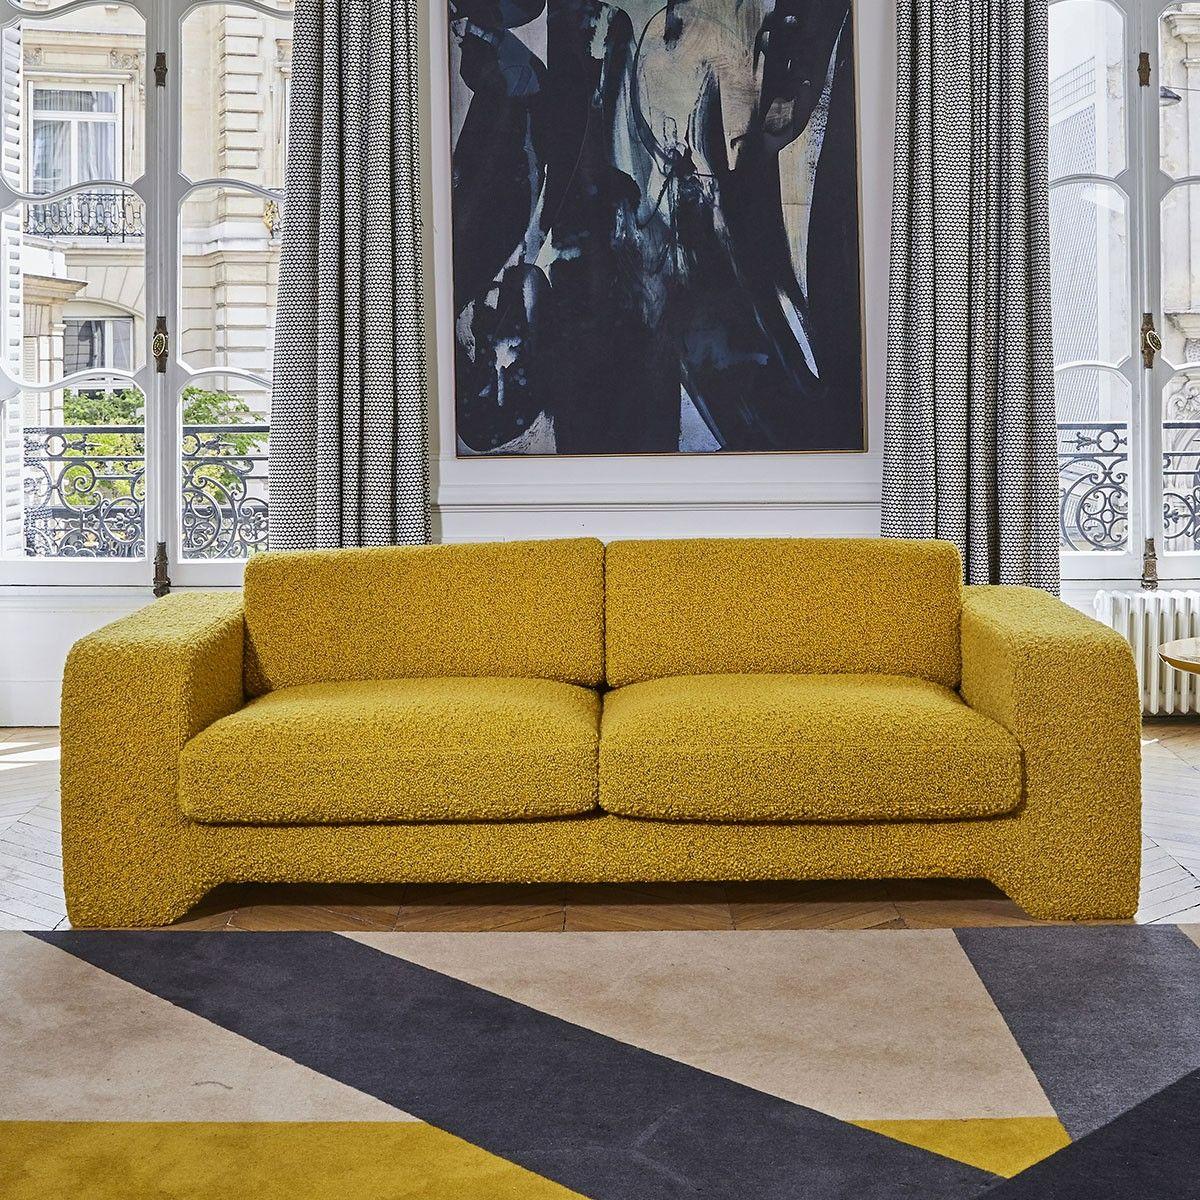 Popus Editions Giovanna 3 seater sofa in grey Verone velvet upholstery.

Giovanna is a sofa with a strong profile. A sober, plush line, with this famous detail that changes everything, so as not to forget its strength of character and this